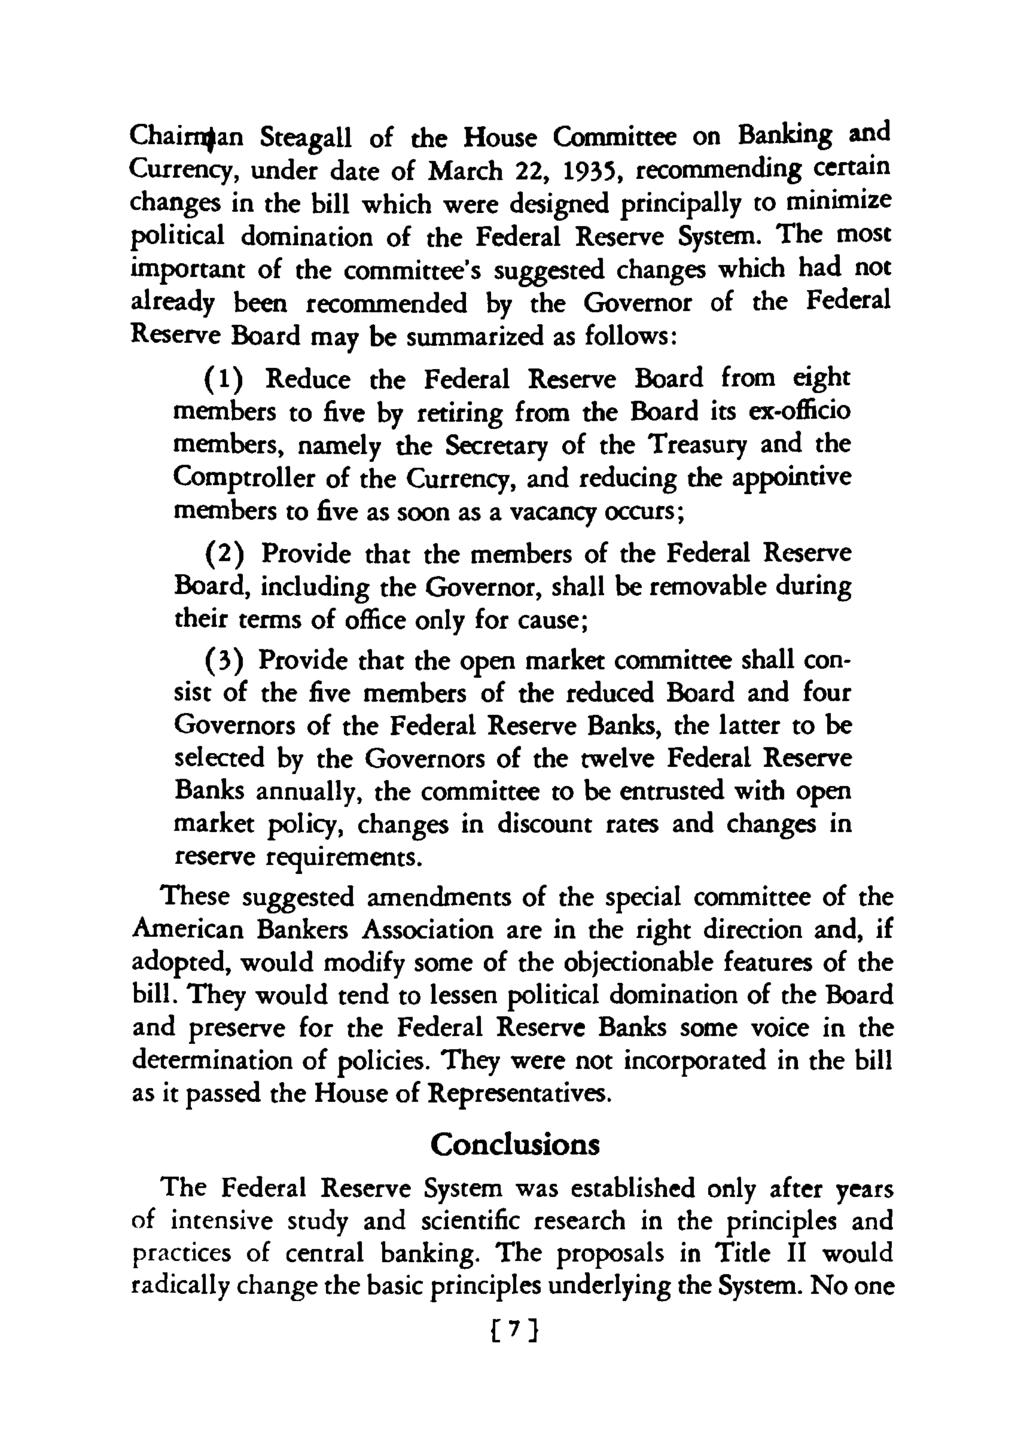 Chairnfan Steagall of the House Committee on Banking and Currency, under date of March 22, 1935, recommending certain changes in the bill which were designed principally to minimize political